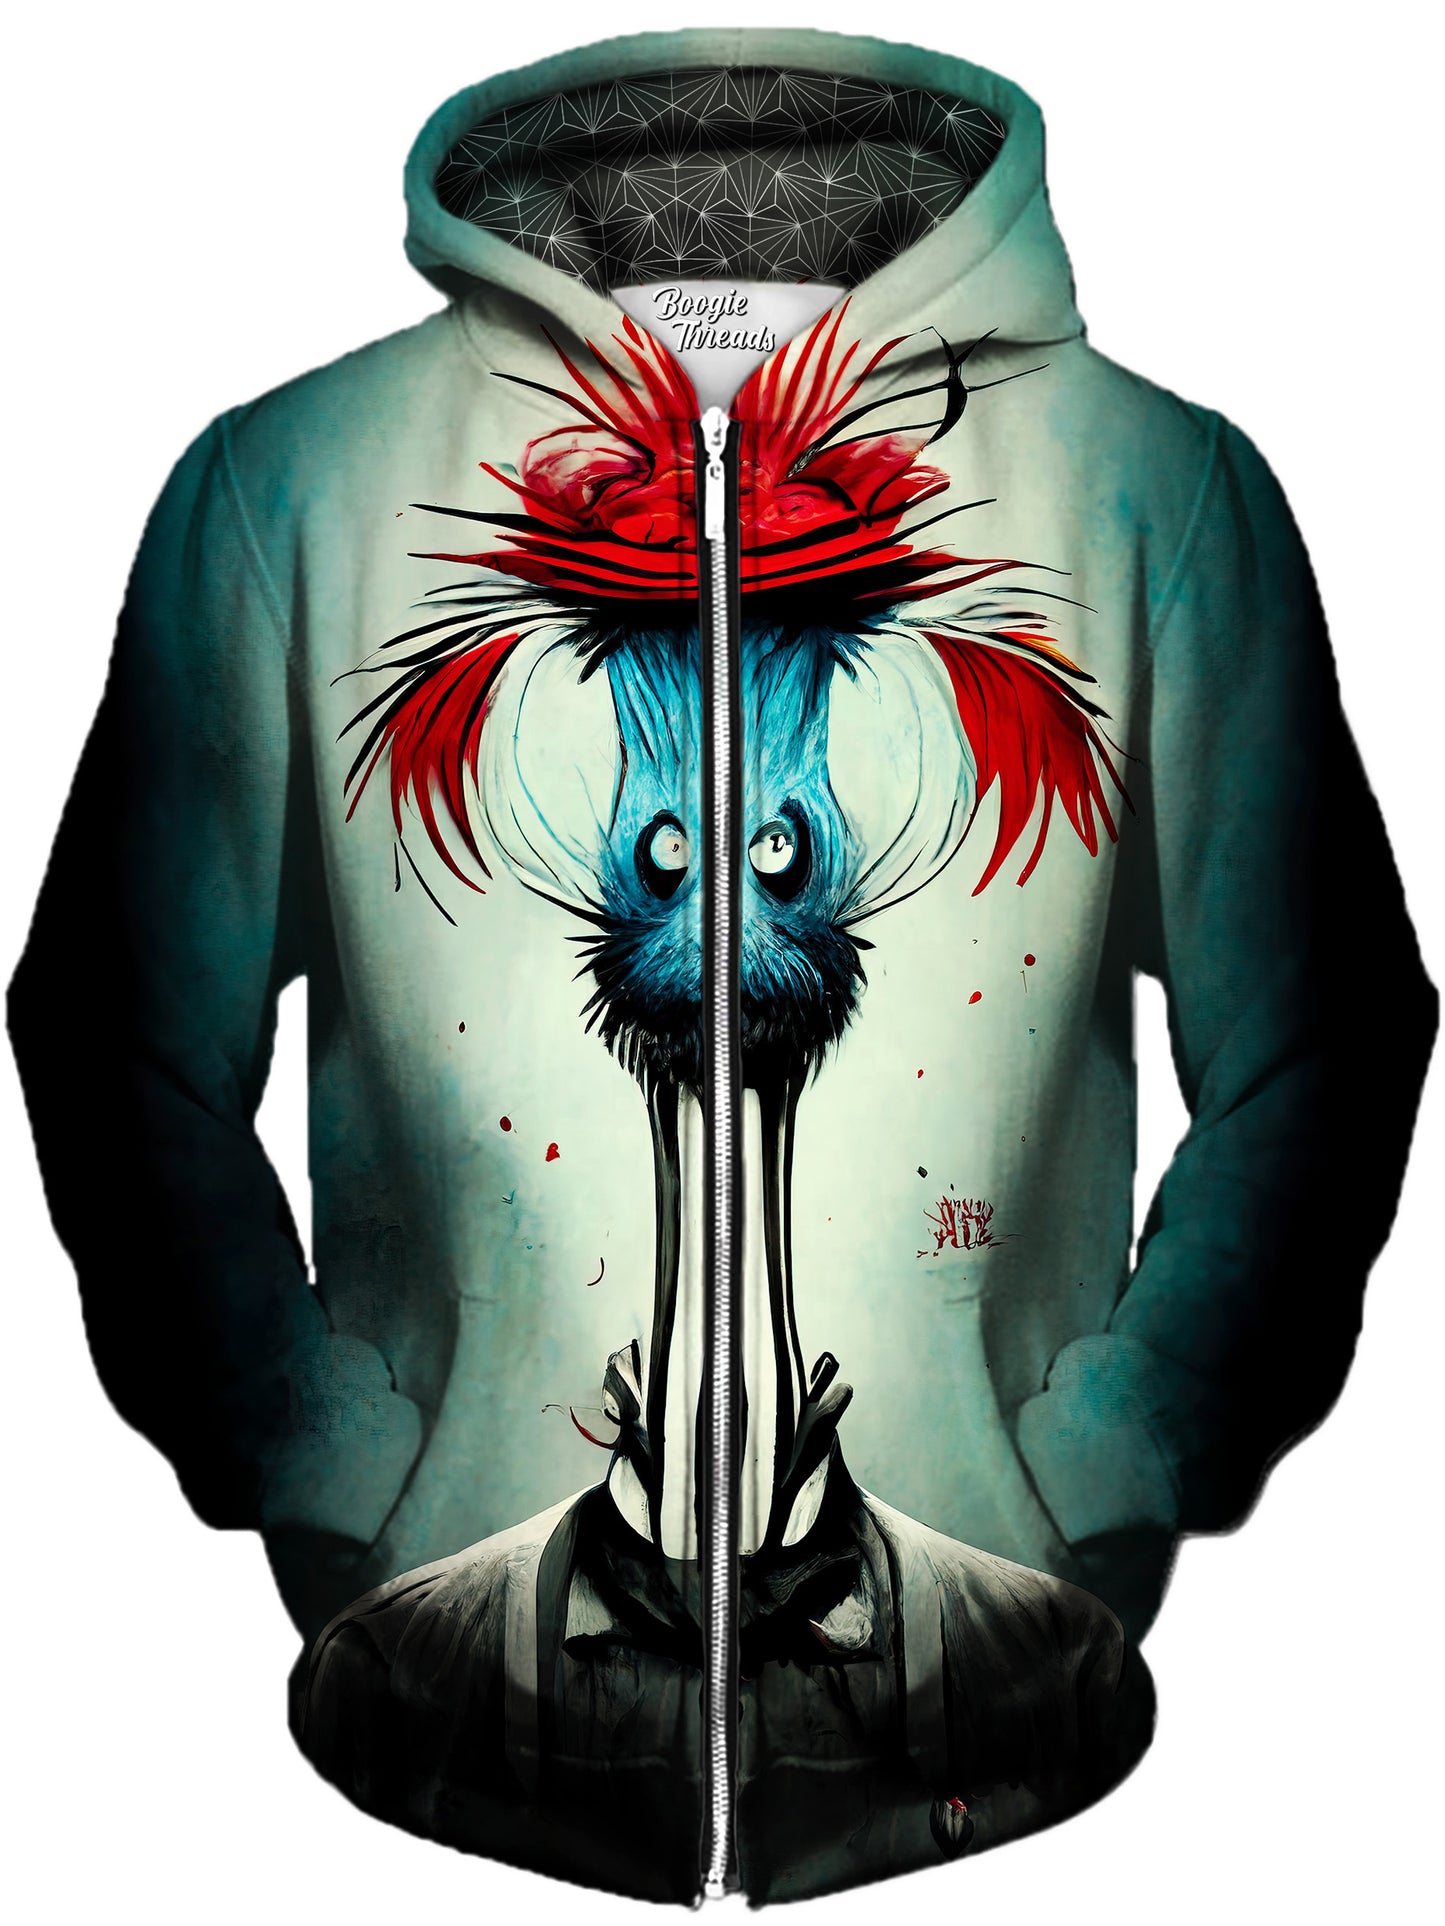 Playful Anger Unisex Zip-Up Hoodie, Gratefully Dyed, | iEDM